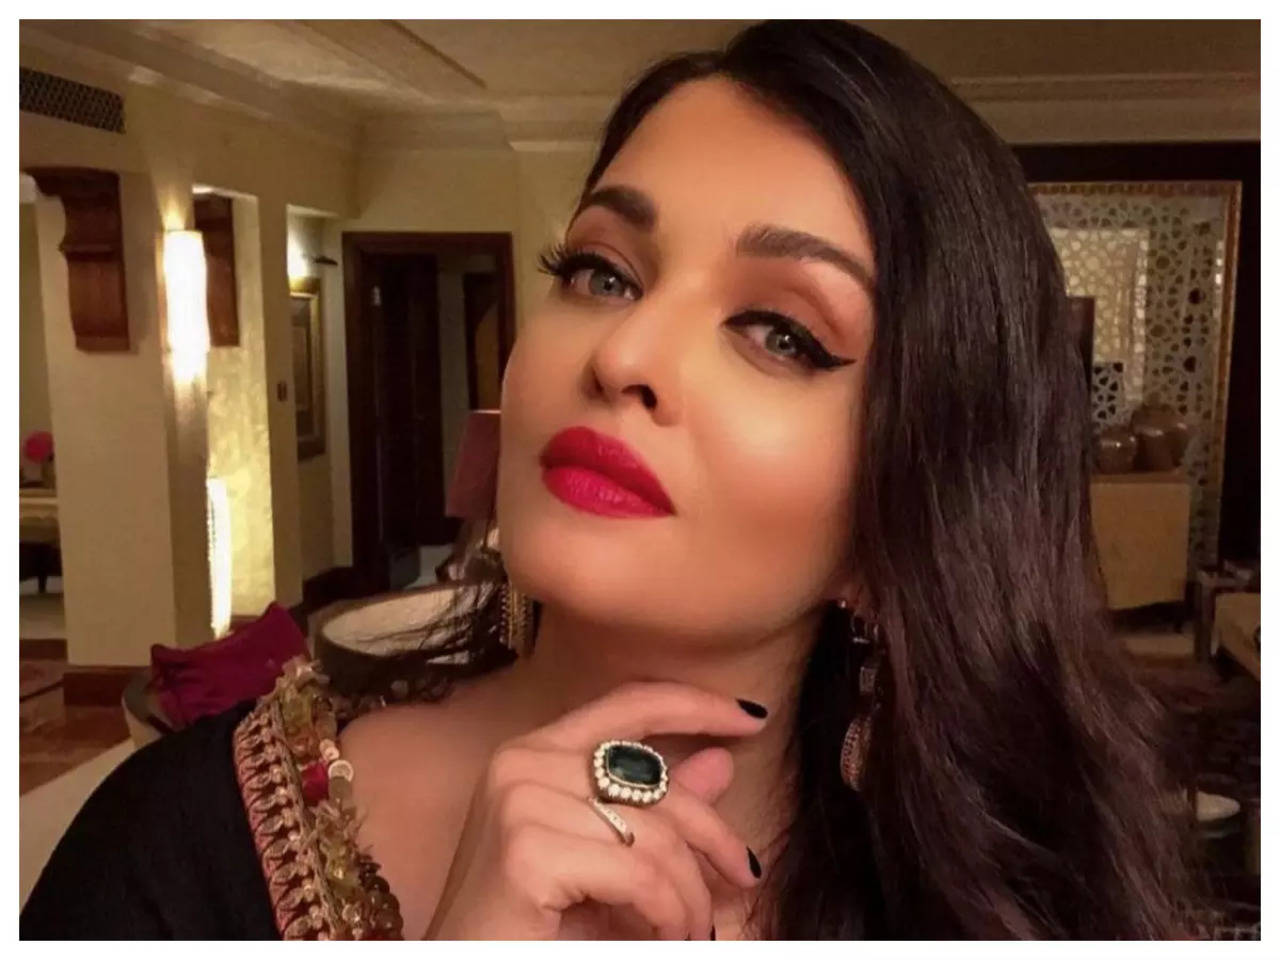 Aishwarya Rai Bachchan bewitches in black as she attends an event in Dubai - See pics Hindi Movie News picture